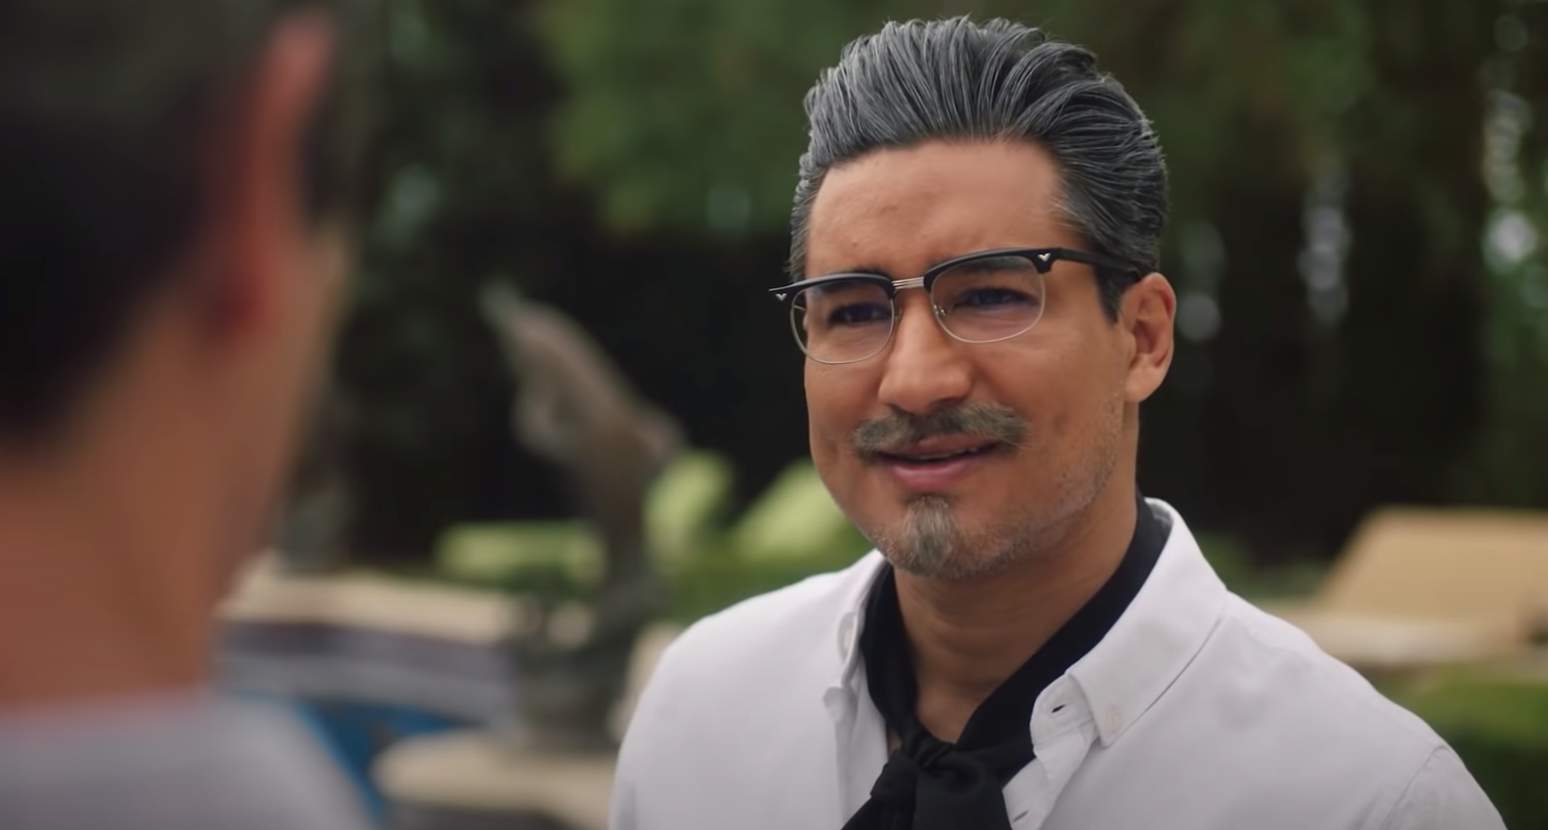 Yes, Lifetime’s newest ‘mini-movie’ is Kentucky Fried Chicken-themed, starring Mario Lopez as sexy Colonel Sanders